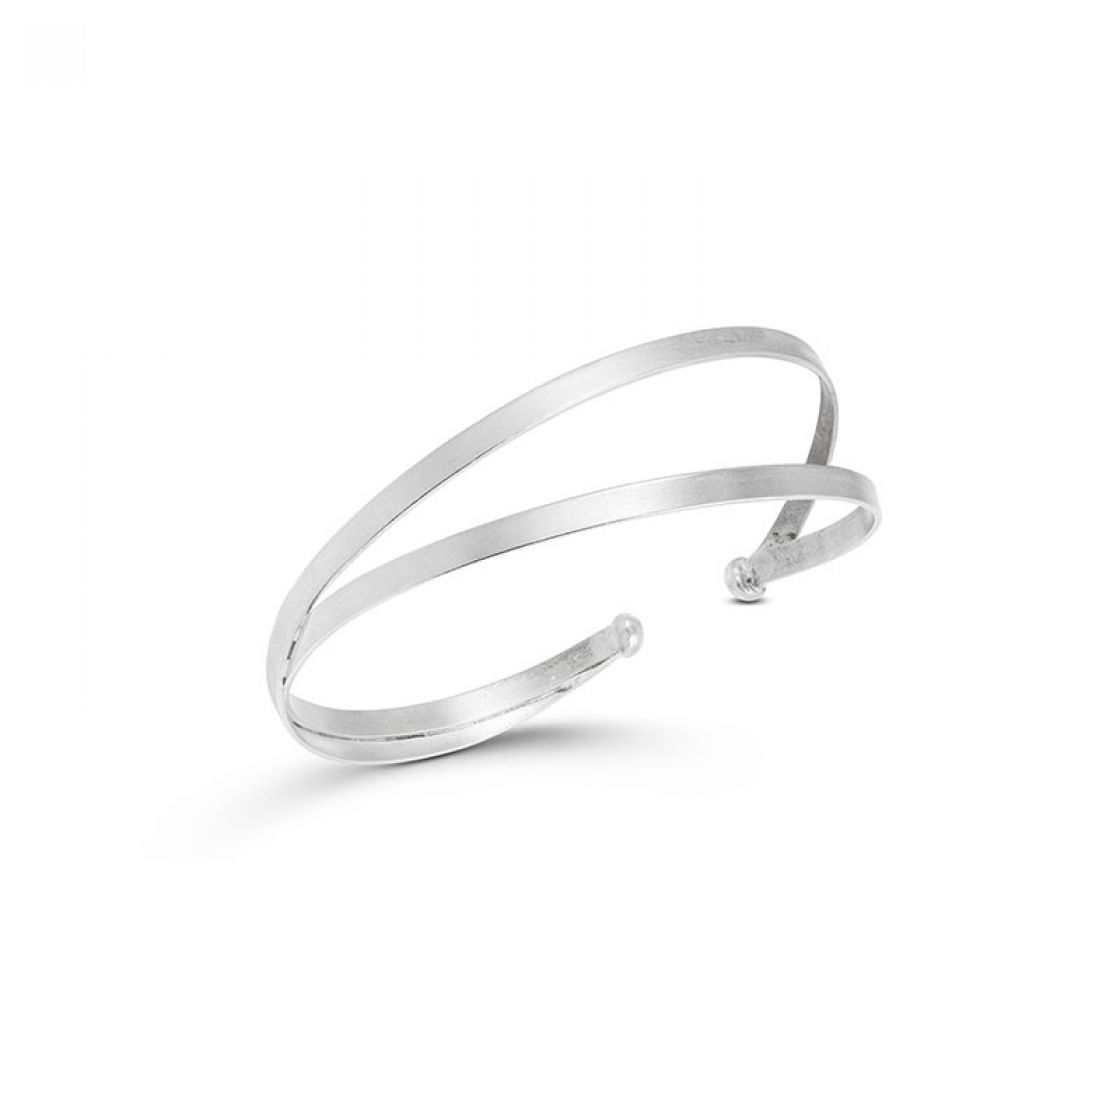 Beautifull and elegant double cuff bracelet, easy adjustable on every wrist.